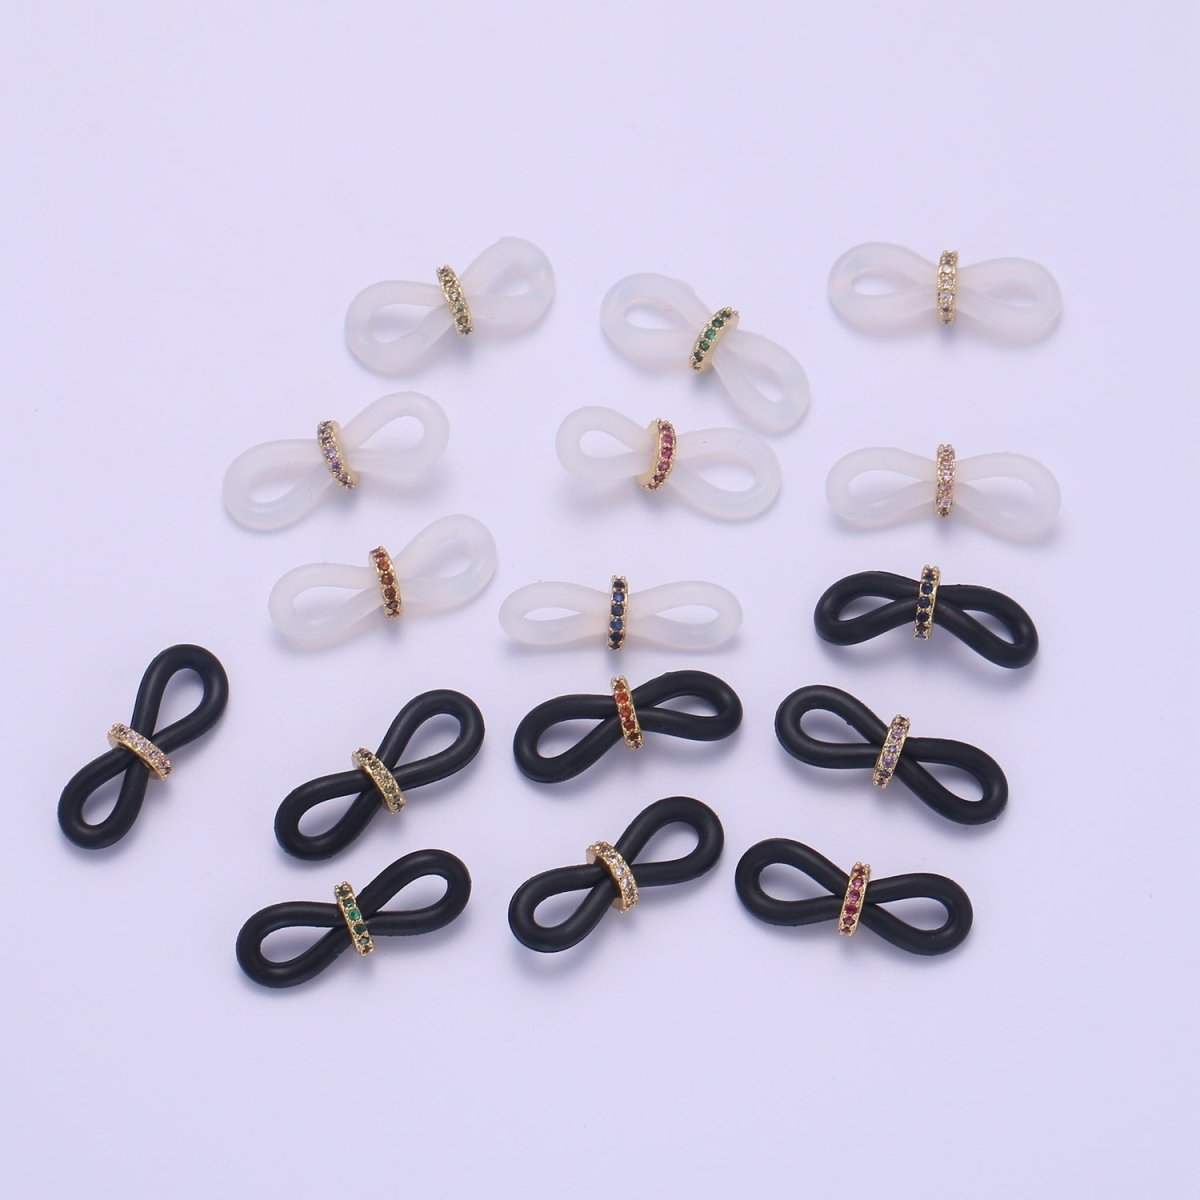 Rubber parts with Adjustable Cz Beads, Rubber Ends for Facemask Eyewear holder, One Pair of Rubber Grips, Replacement parts / One Pair L-238~L-253 - DLUXCA